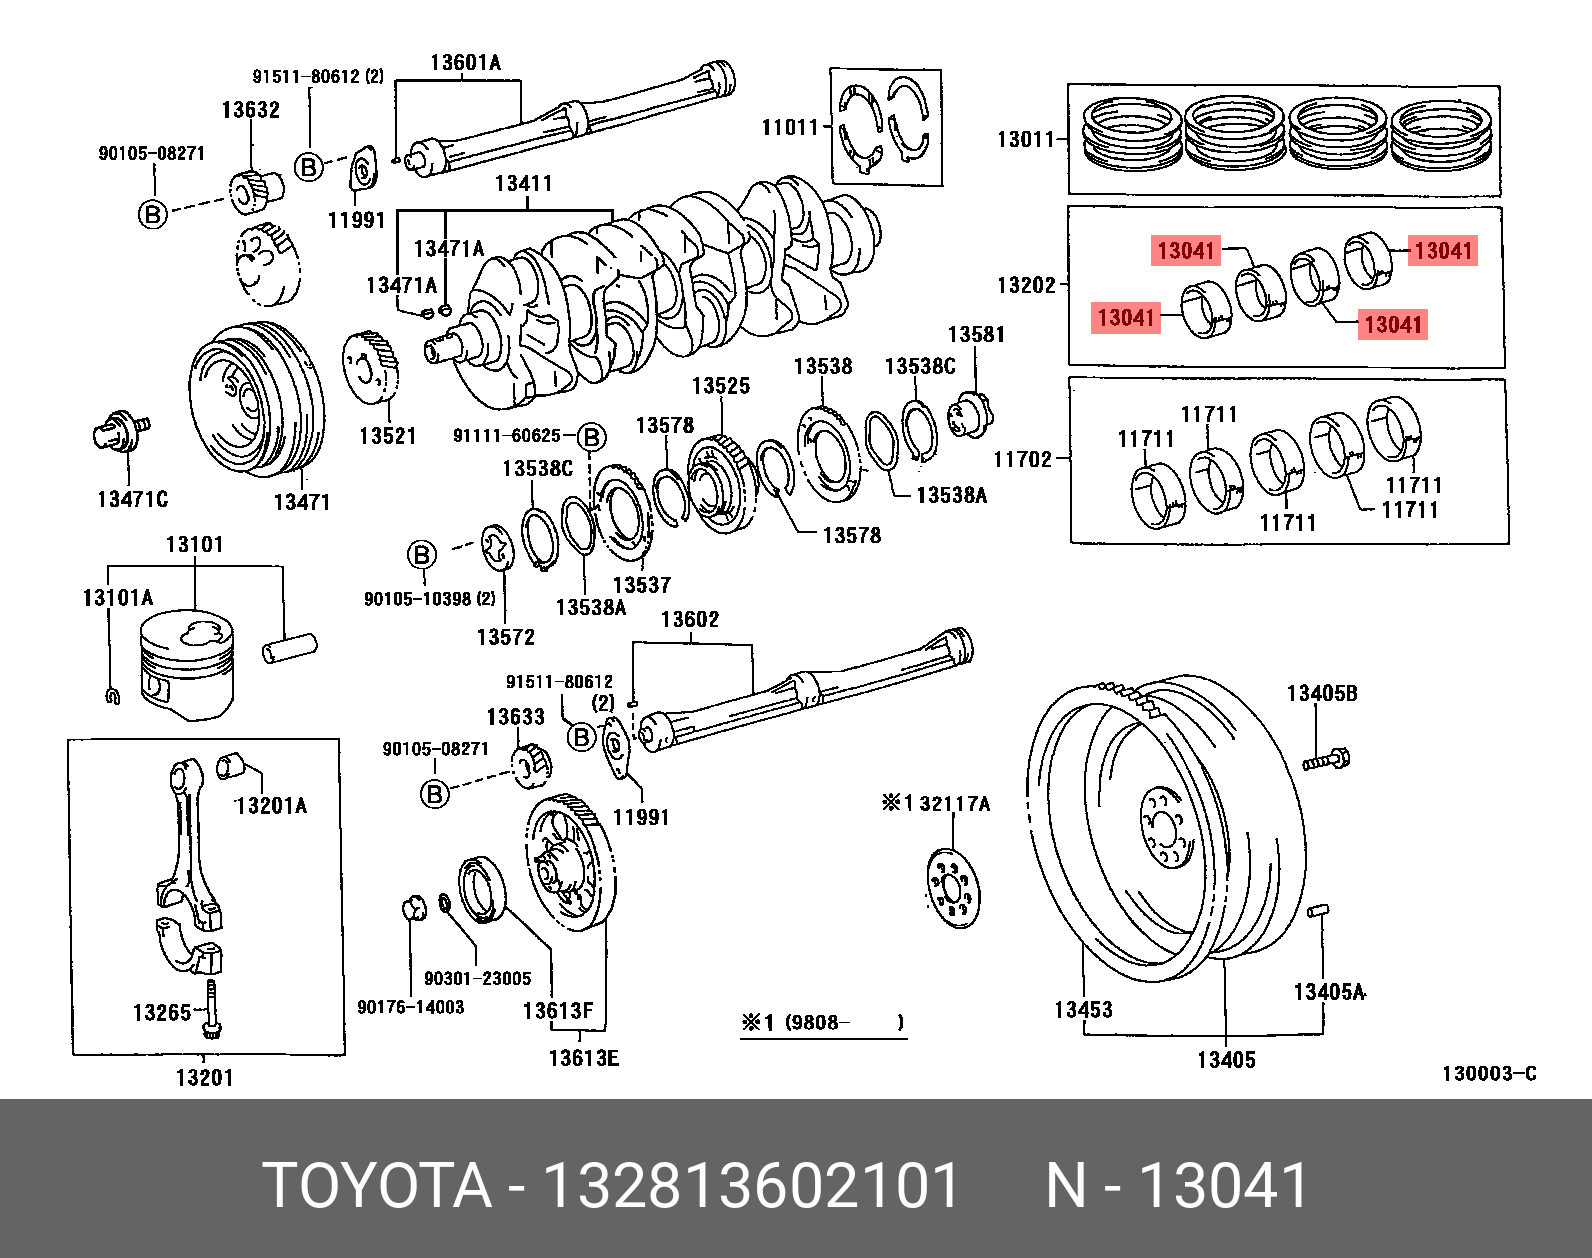 CAMRY HYBRID 201108 - 201704, BEARING, CONNECTING ROD